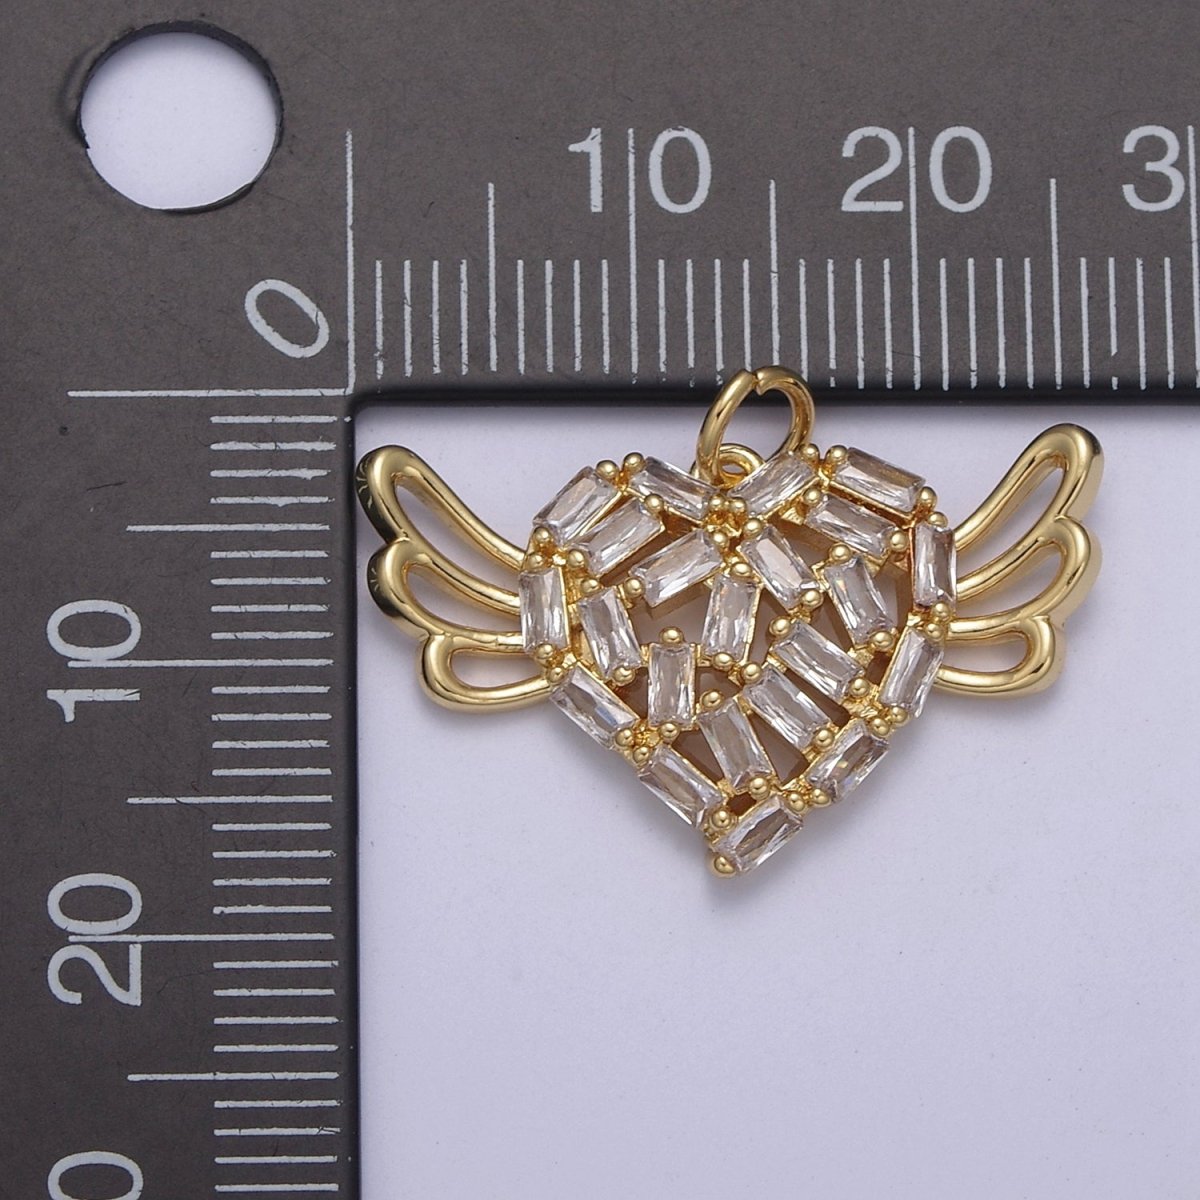 Gold Filled Winged Heart Charm. Angel Wings Heart Charm Cz Baguette Charm Flying Heart Charm C-307 - DLUXCA